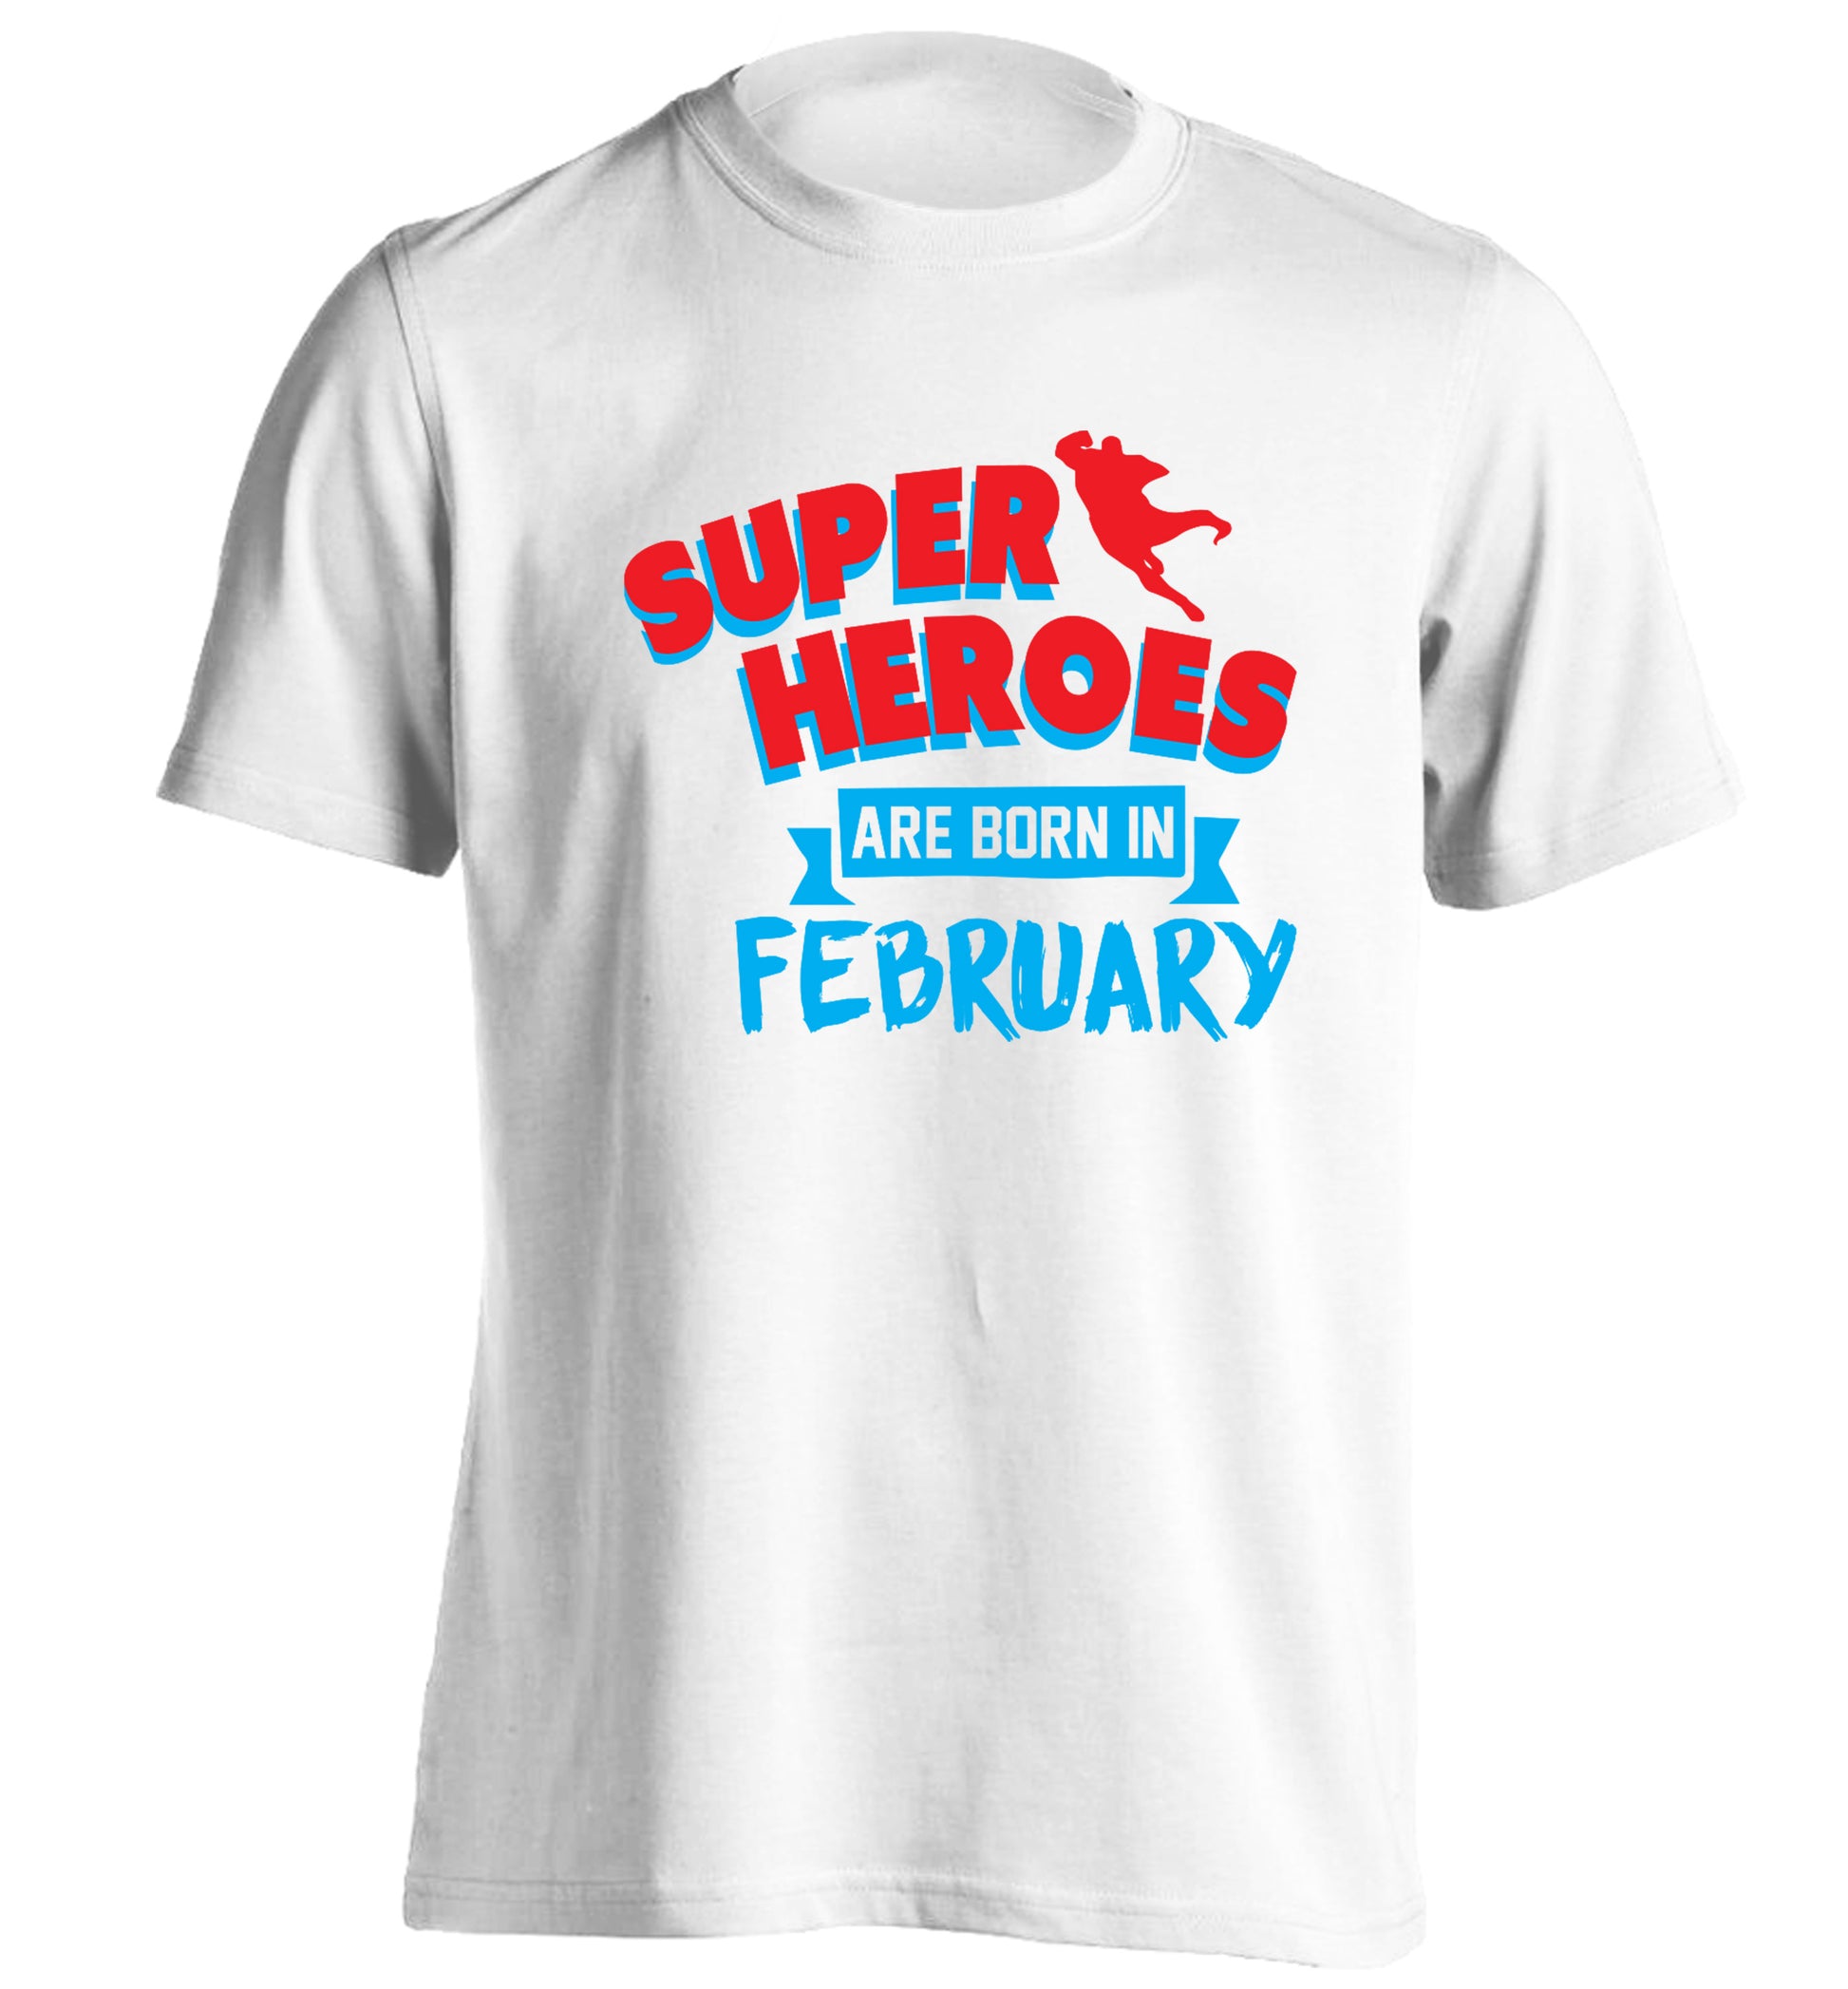 superheroes are born in February adults unisex white Tshirt 2XL